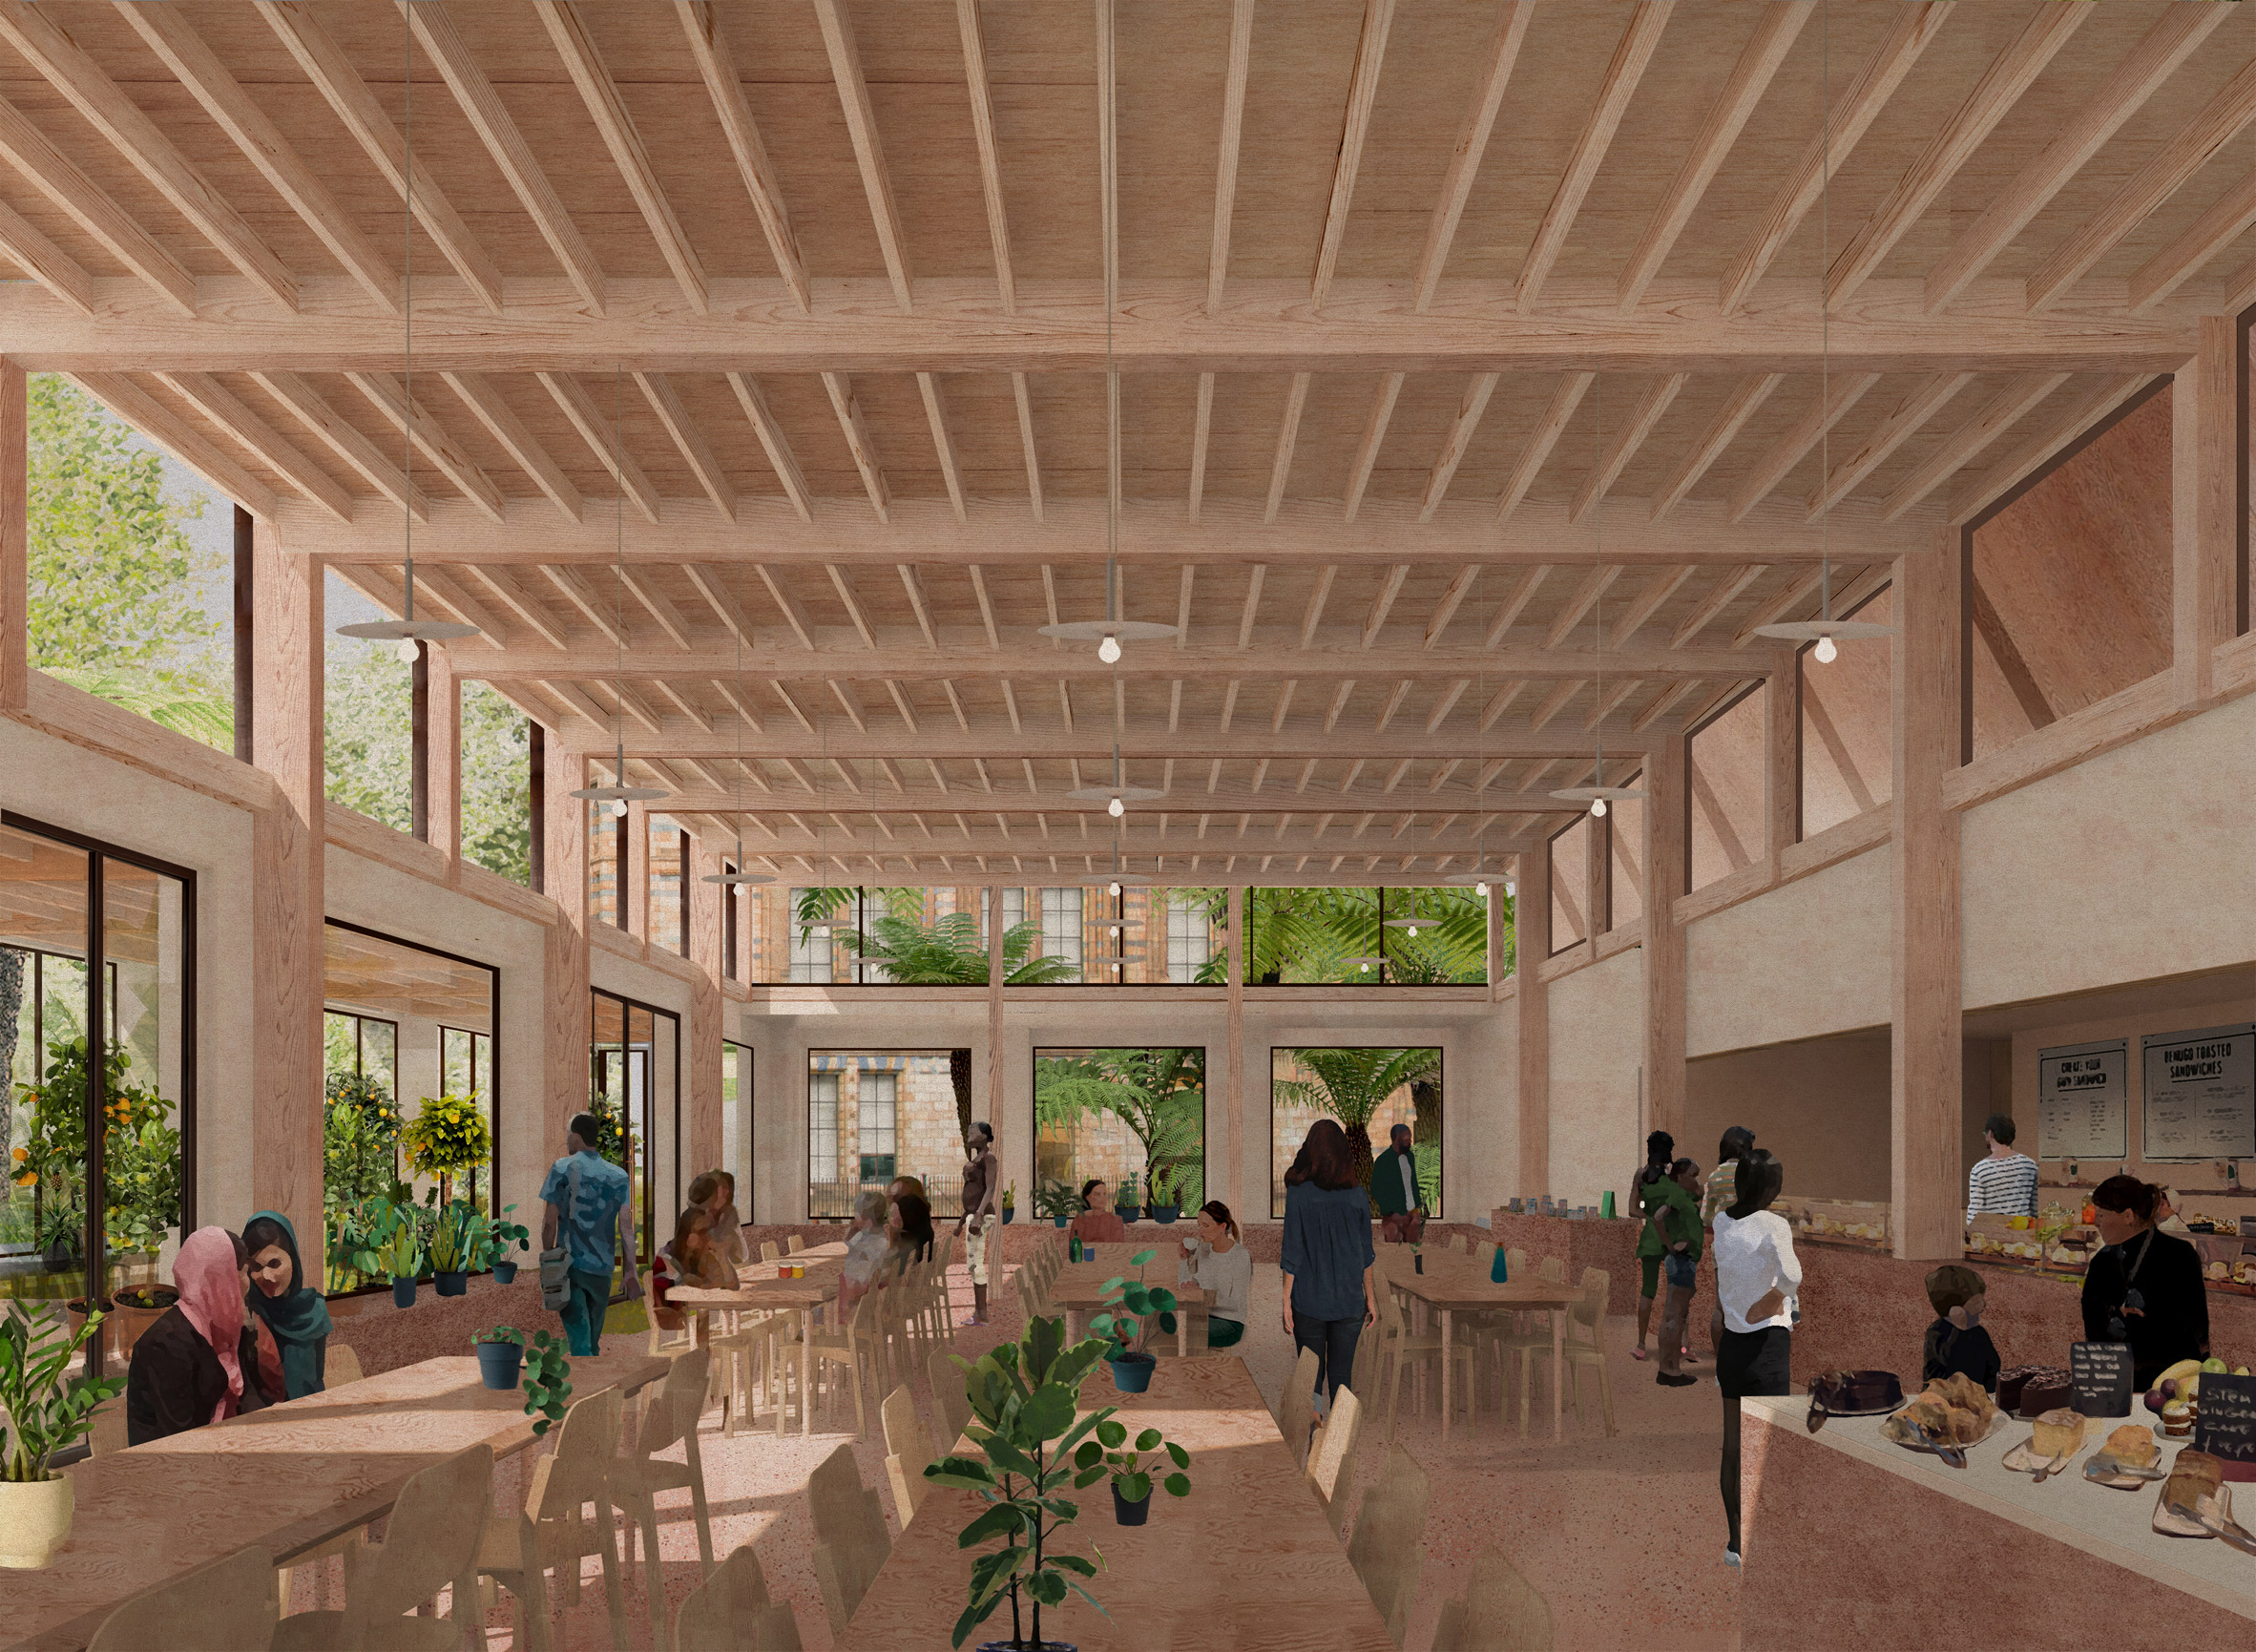 Inside the Urban Nature Project's Garden Building by Feilden Fowles